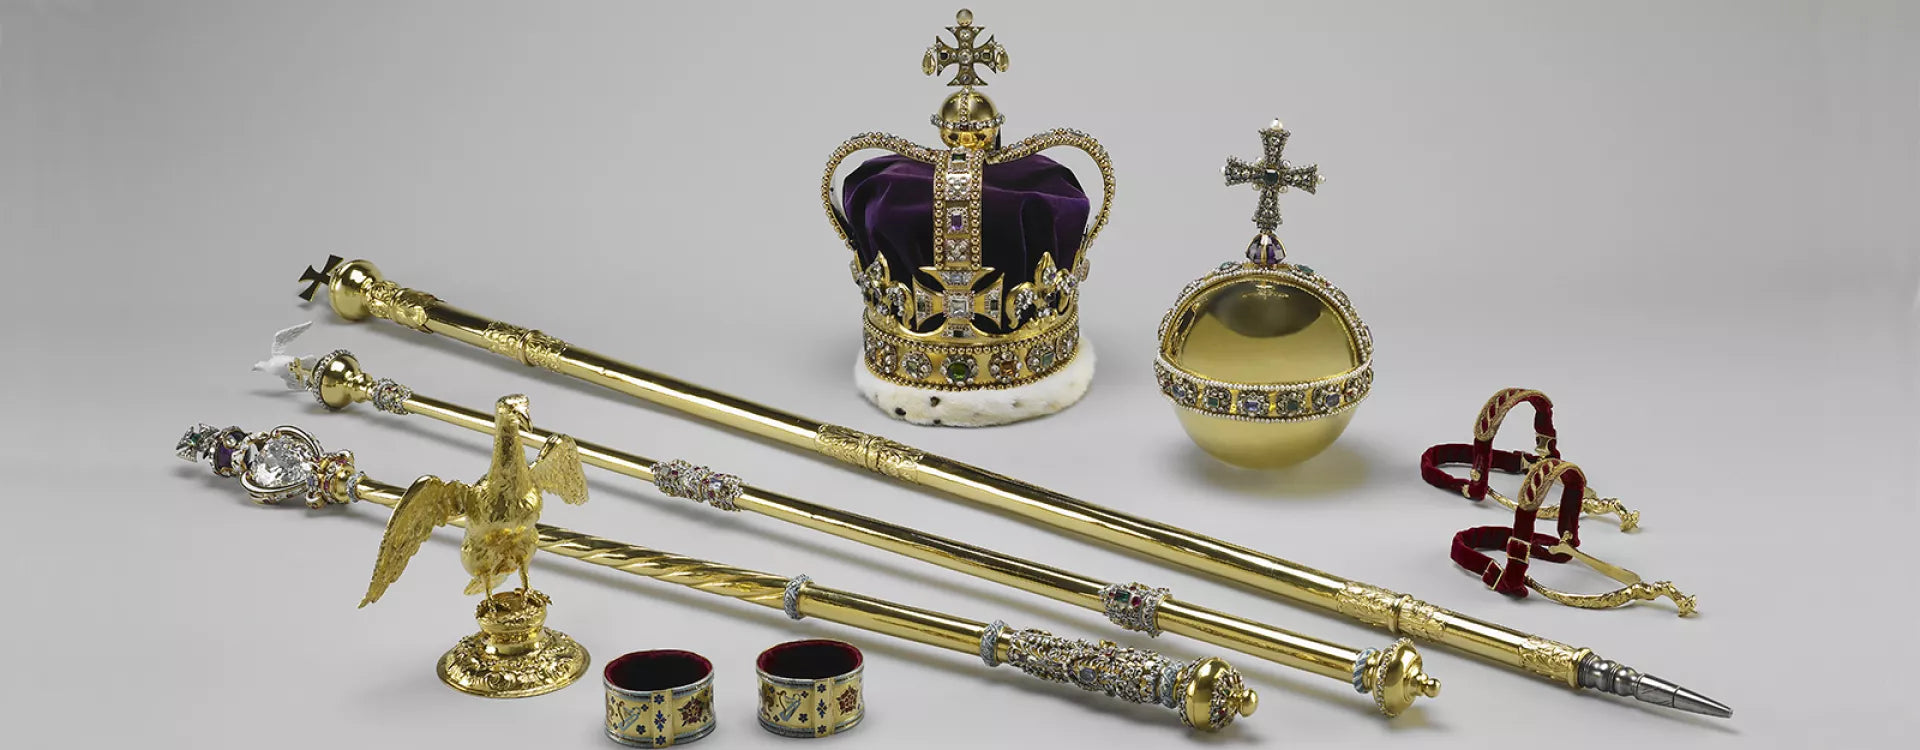 Gems of Majesty: The Crown Jewels of the United Kingdom